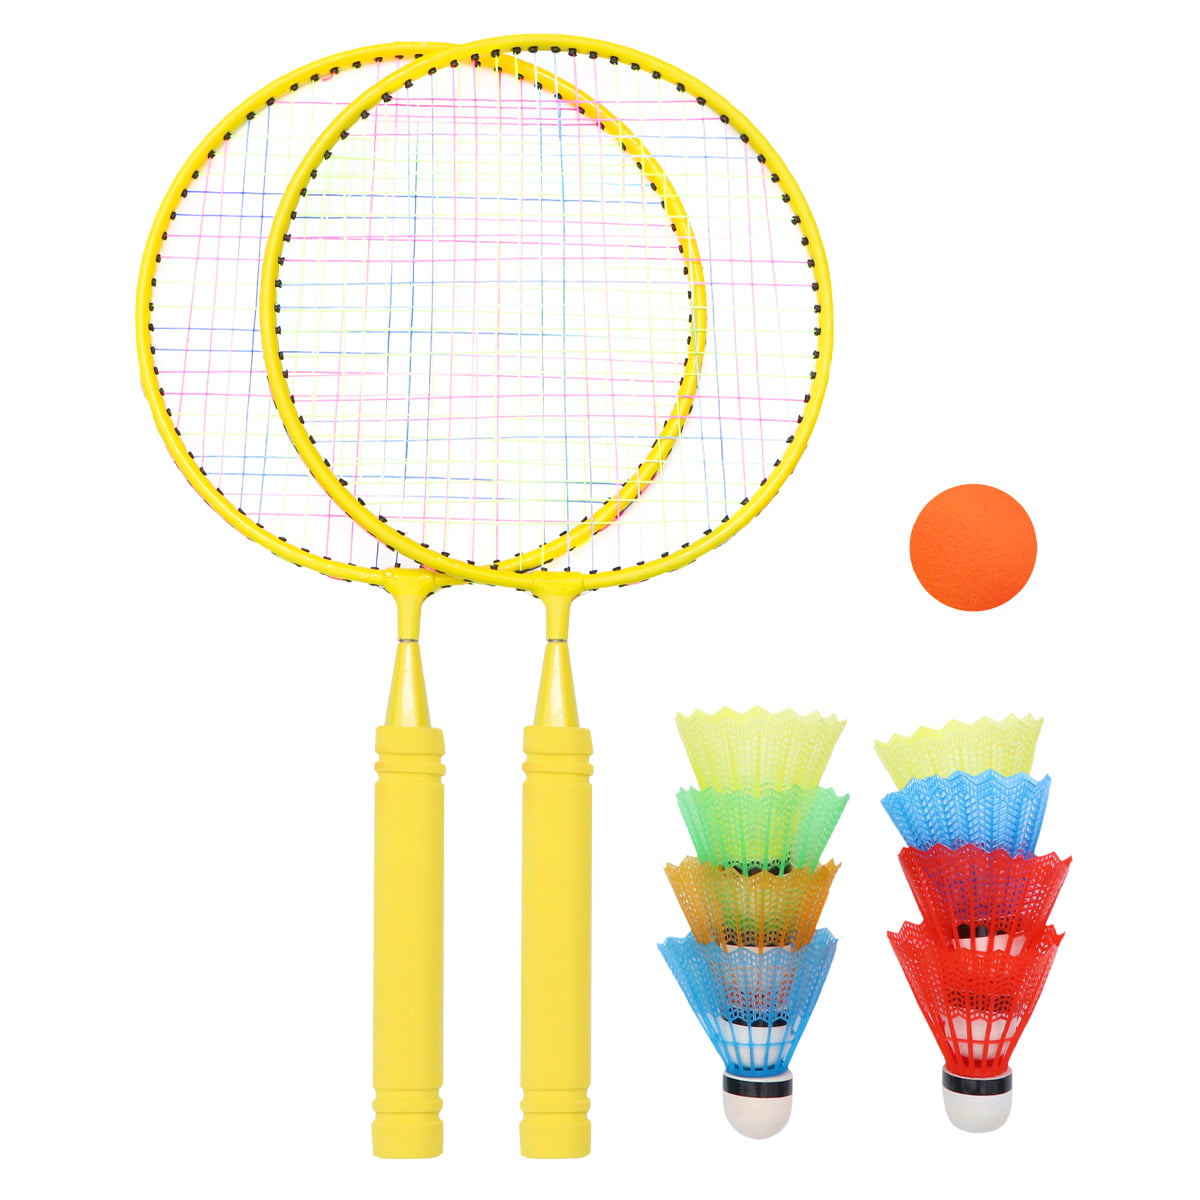 Turbobm 1 Pair Badminton Racket Youth Childrens Badminton Rackets Sports Cartoon Suit Toy for Children Radom Badminton Racket Suit